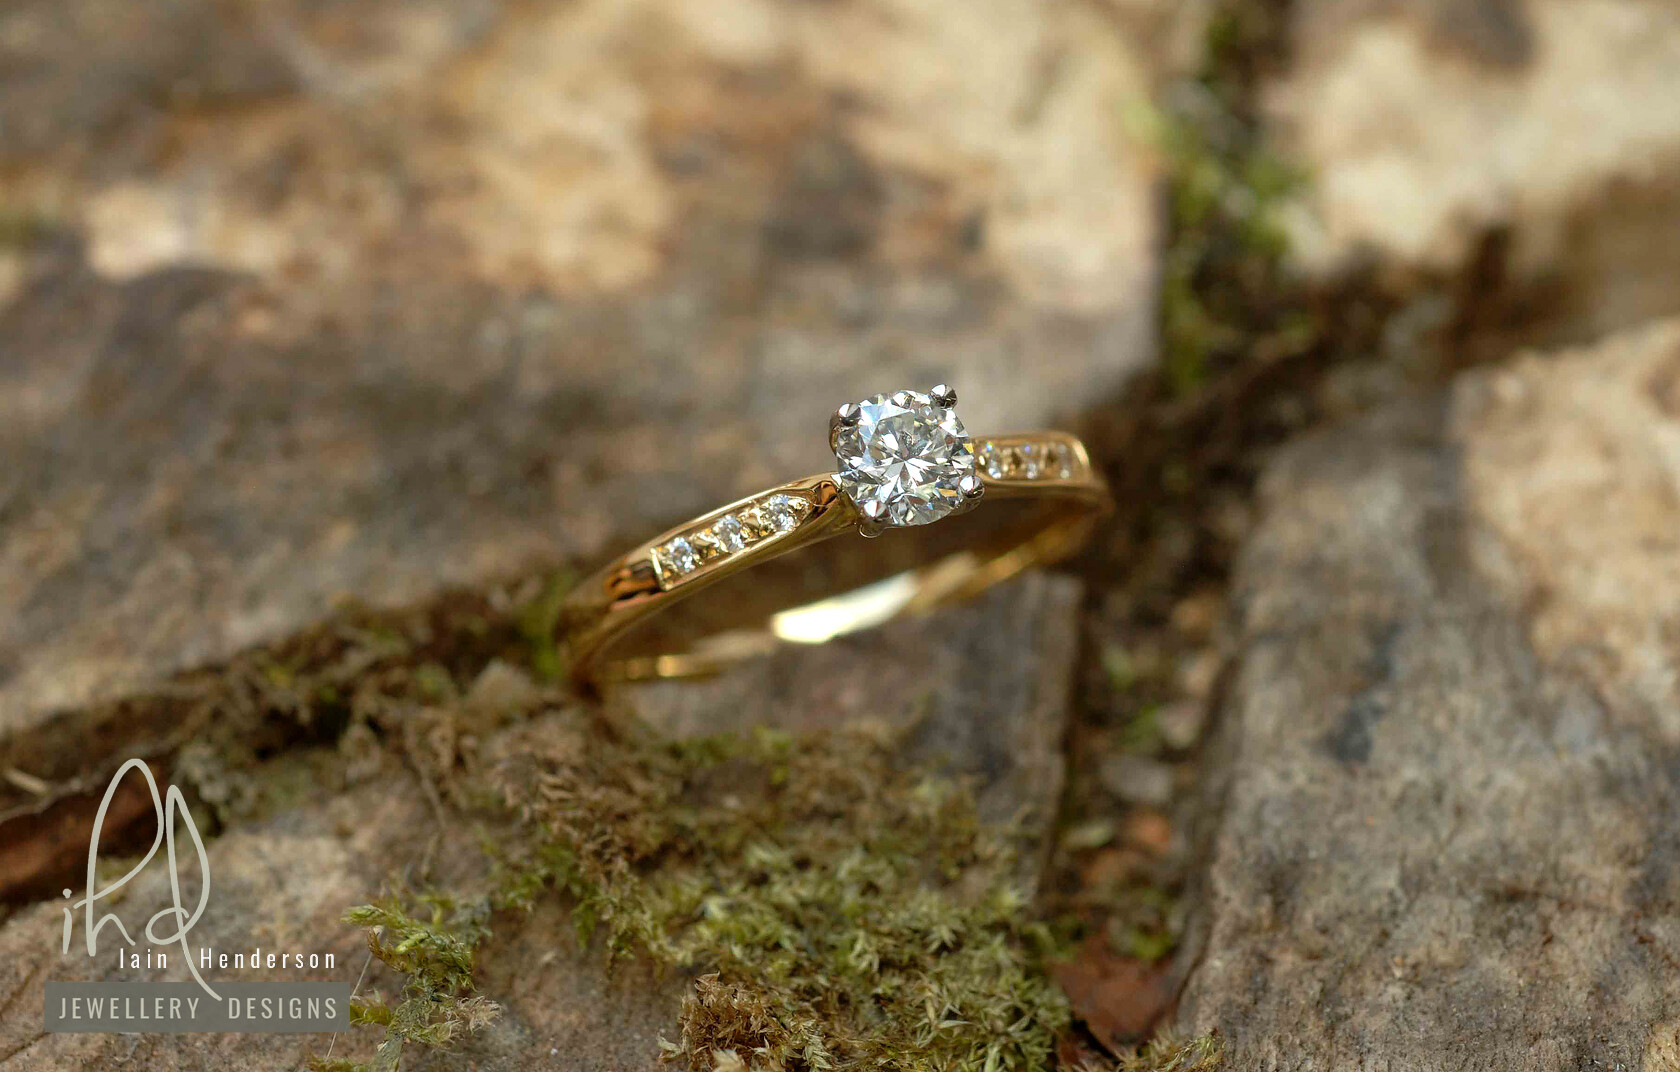 Vintage style yellow gold engagement ring with diamonds in the shoulders